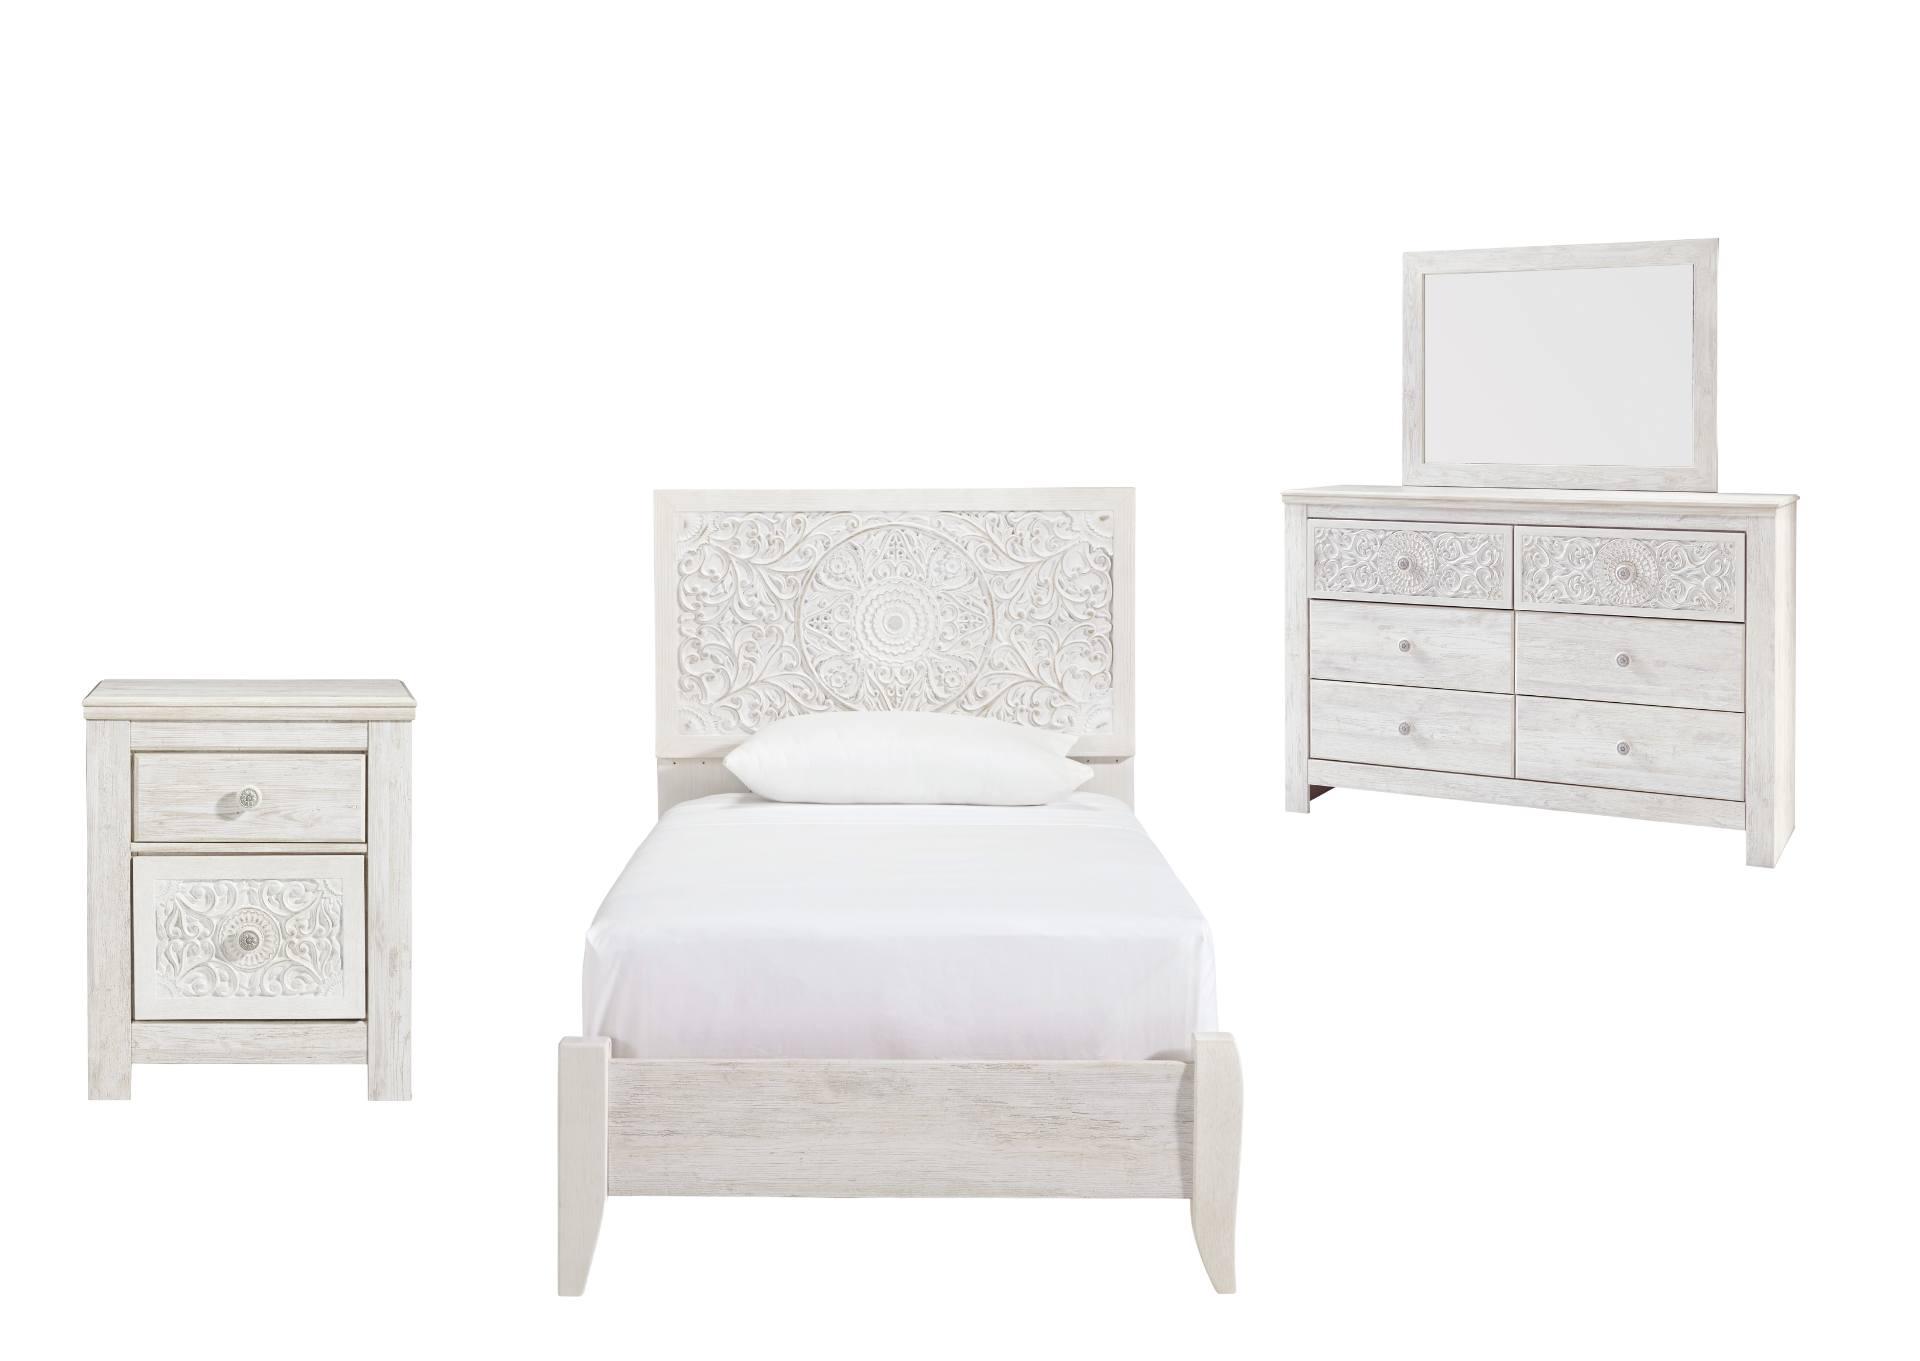 PAXBERRY TWIN BEDROOM SET